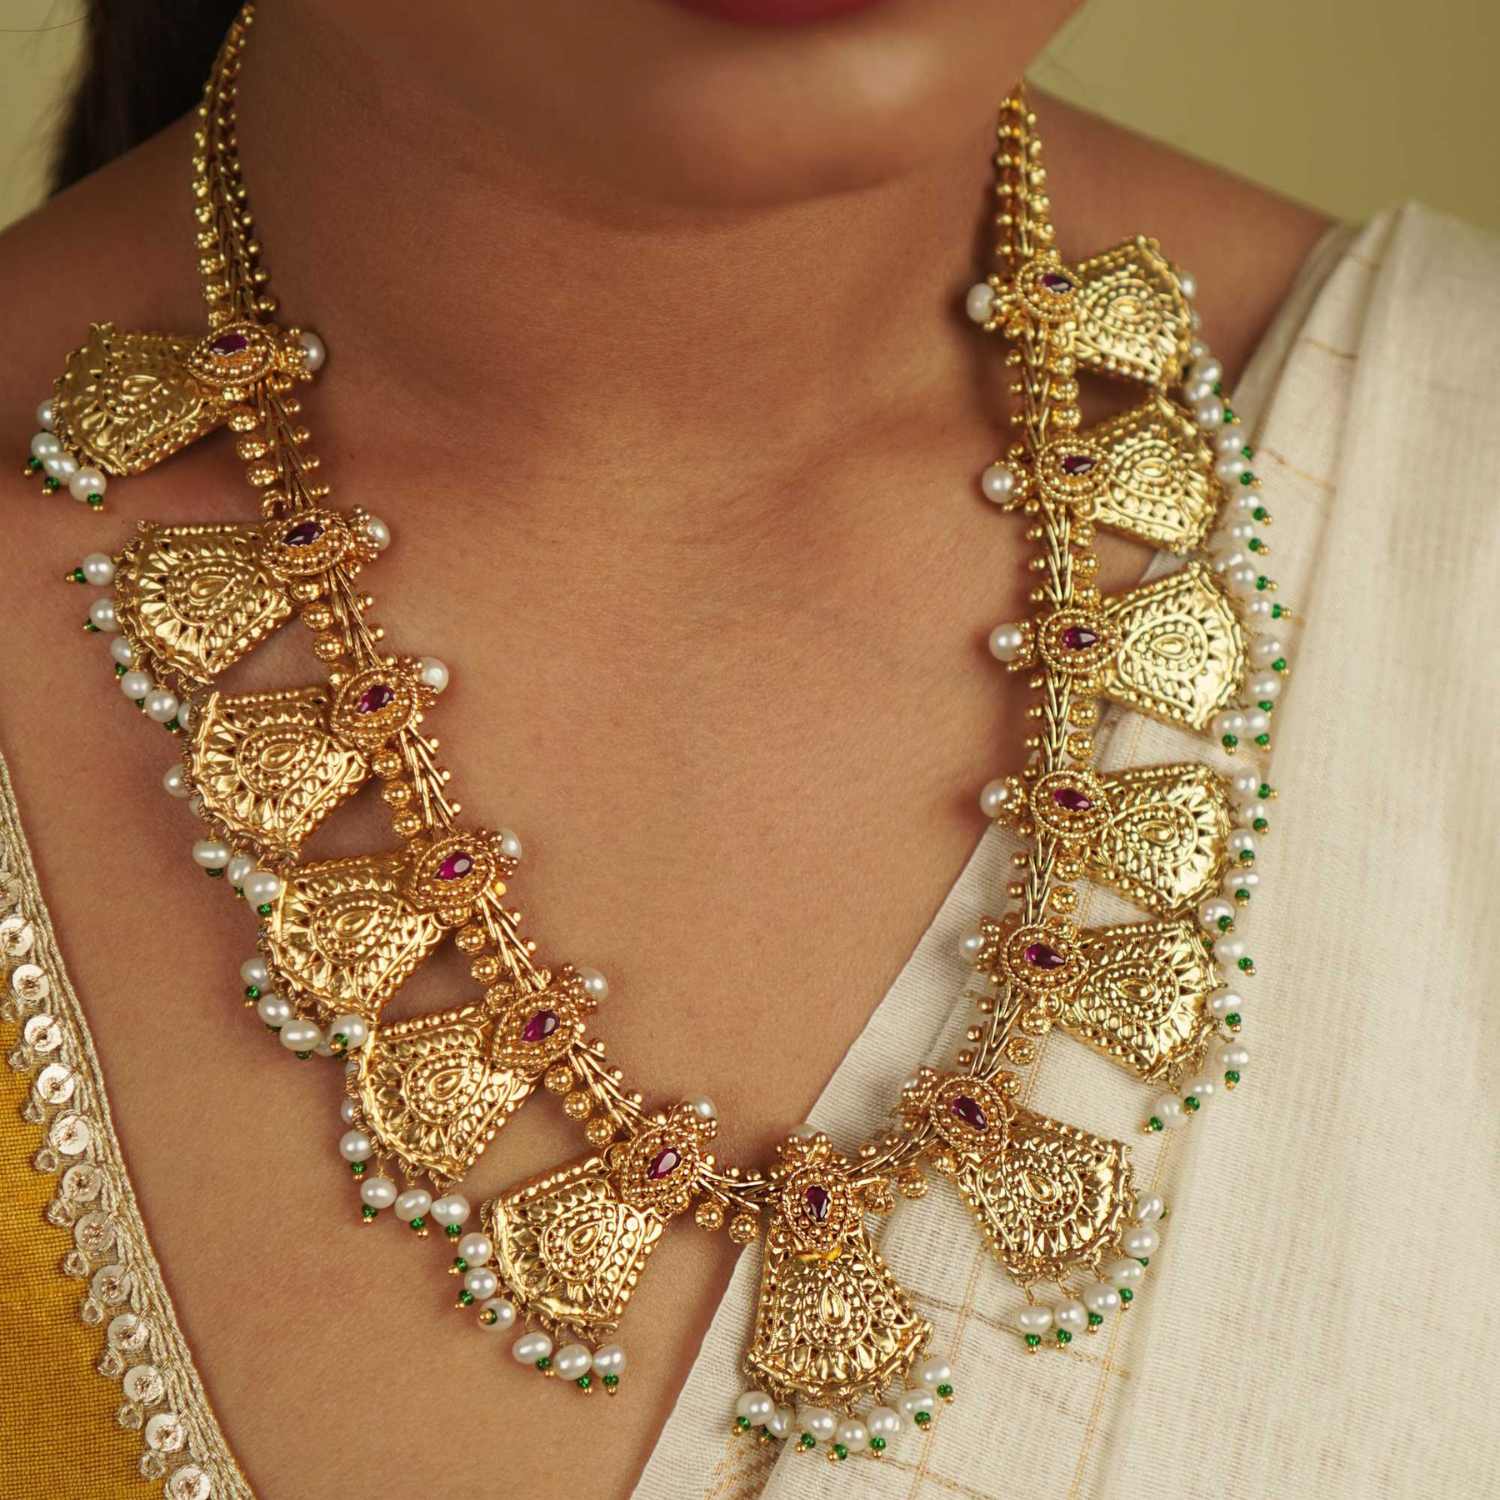 Amshula Temple Necklace